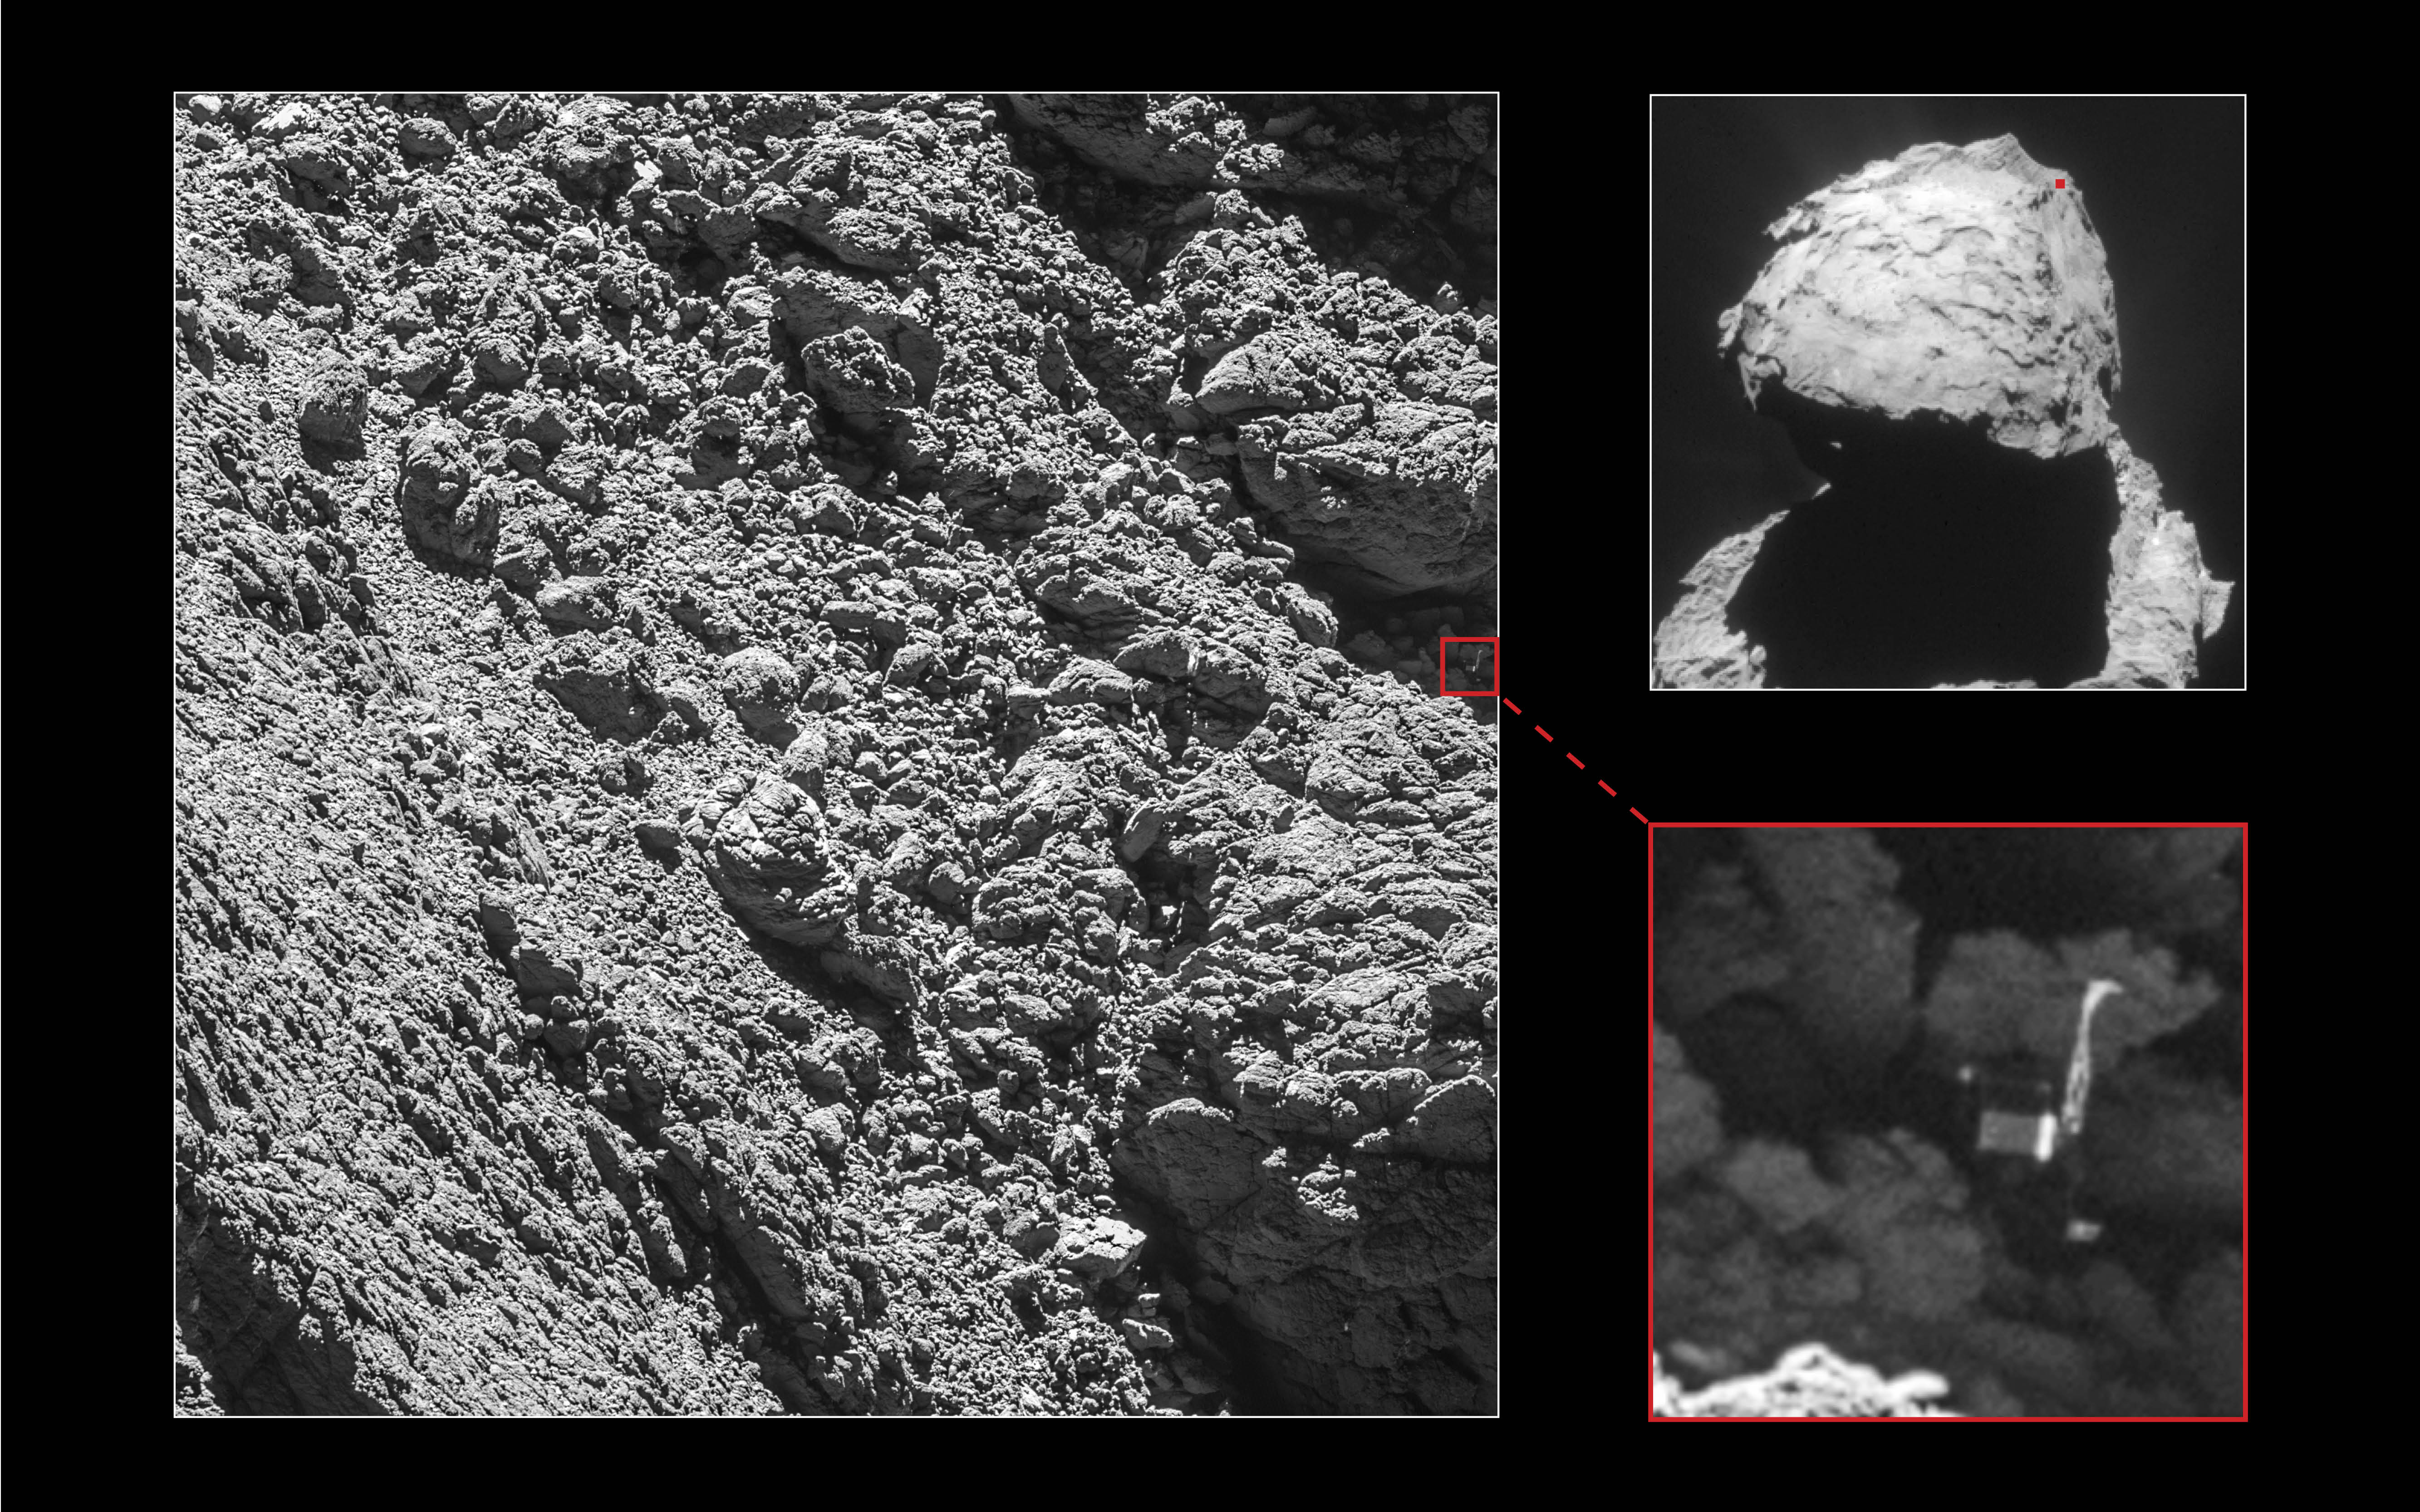 This handout picture obtained from the European Space Agency (ESA) on September 5, 2016 shows images of the landing craft "Philae" viewed for the first time since its crash landing, captured by ORIS narrow-angle camera  taken on September 2, 2016 from a distance of 2.7 km.   Cameras onboard Europe's comet orbiter Rosetta has spotted the tiny lander Philae for the first time since its crash-landing in November 2014, the European Space Agency said on September 5, 2016. "Less than a month before the end of the mission, Rosetta's high-resolution camera has revealed the Philae lander wedged into a dark crack on comet 67P/Churyumov-Gerasimenko," it said in a statement.  / AFP PHOTO / EUROPEAN SPACE AGENCY (ESA) / HO / RESTRICTED TO EDITORIAL USE - MANDATORY CREDIT "AFP PHOTO /European Space Agency (ESA) " - NO MARKETING NO ADVERTISING CAMPAIGNS - DISTRIBUTED AS A SERVICE TO CLIENTS